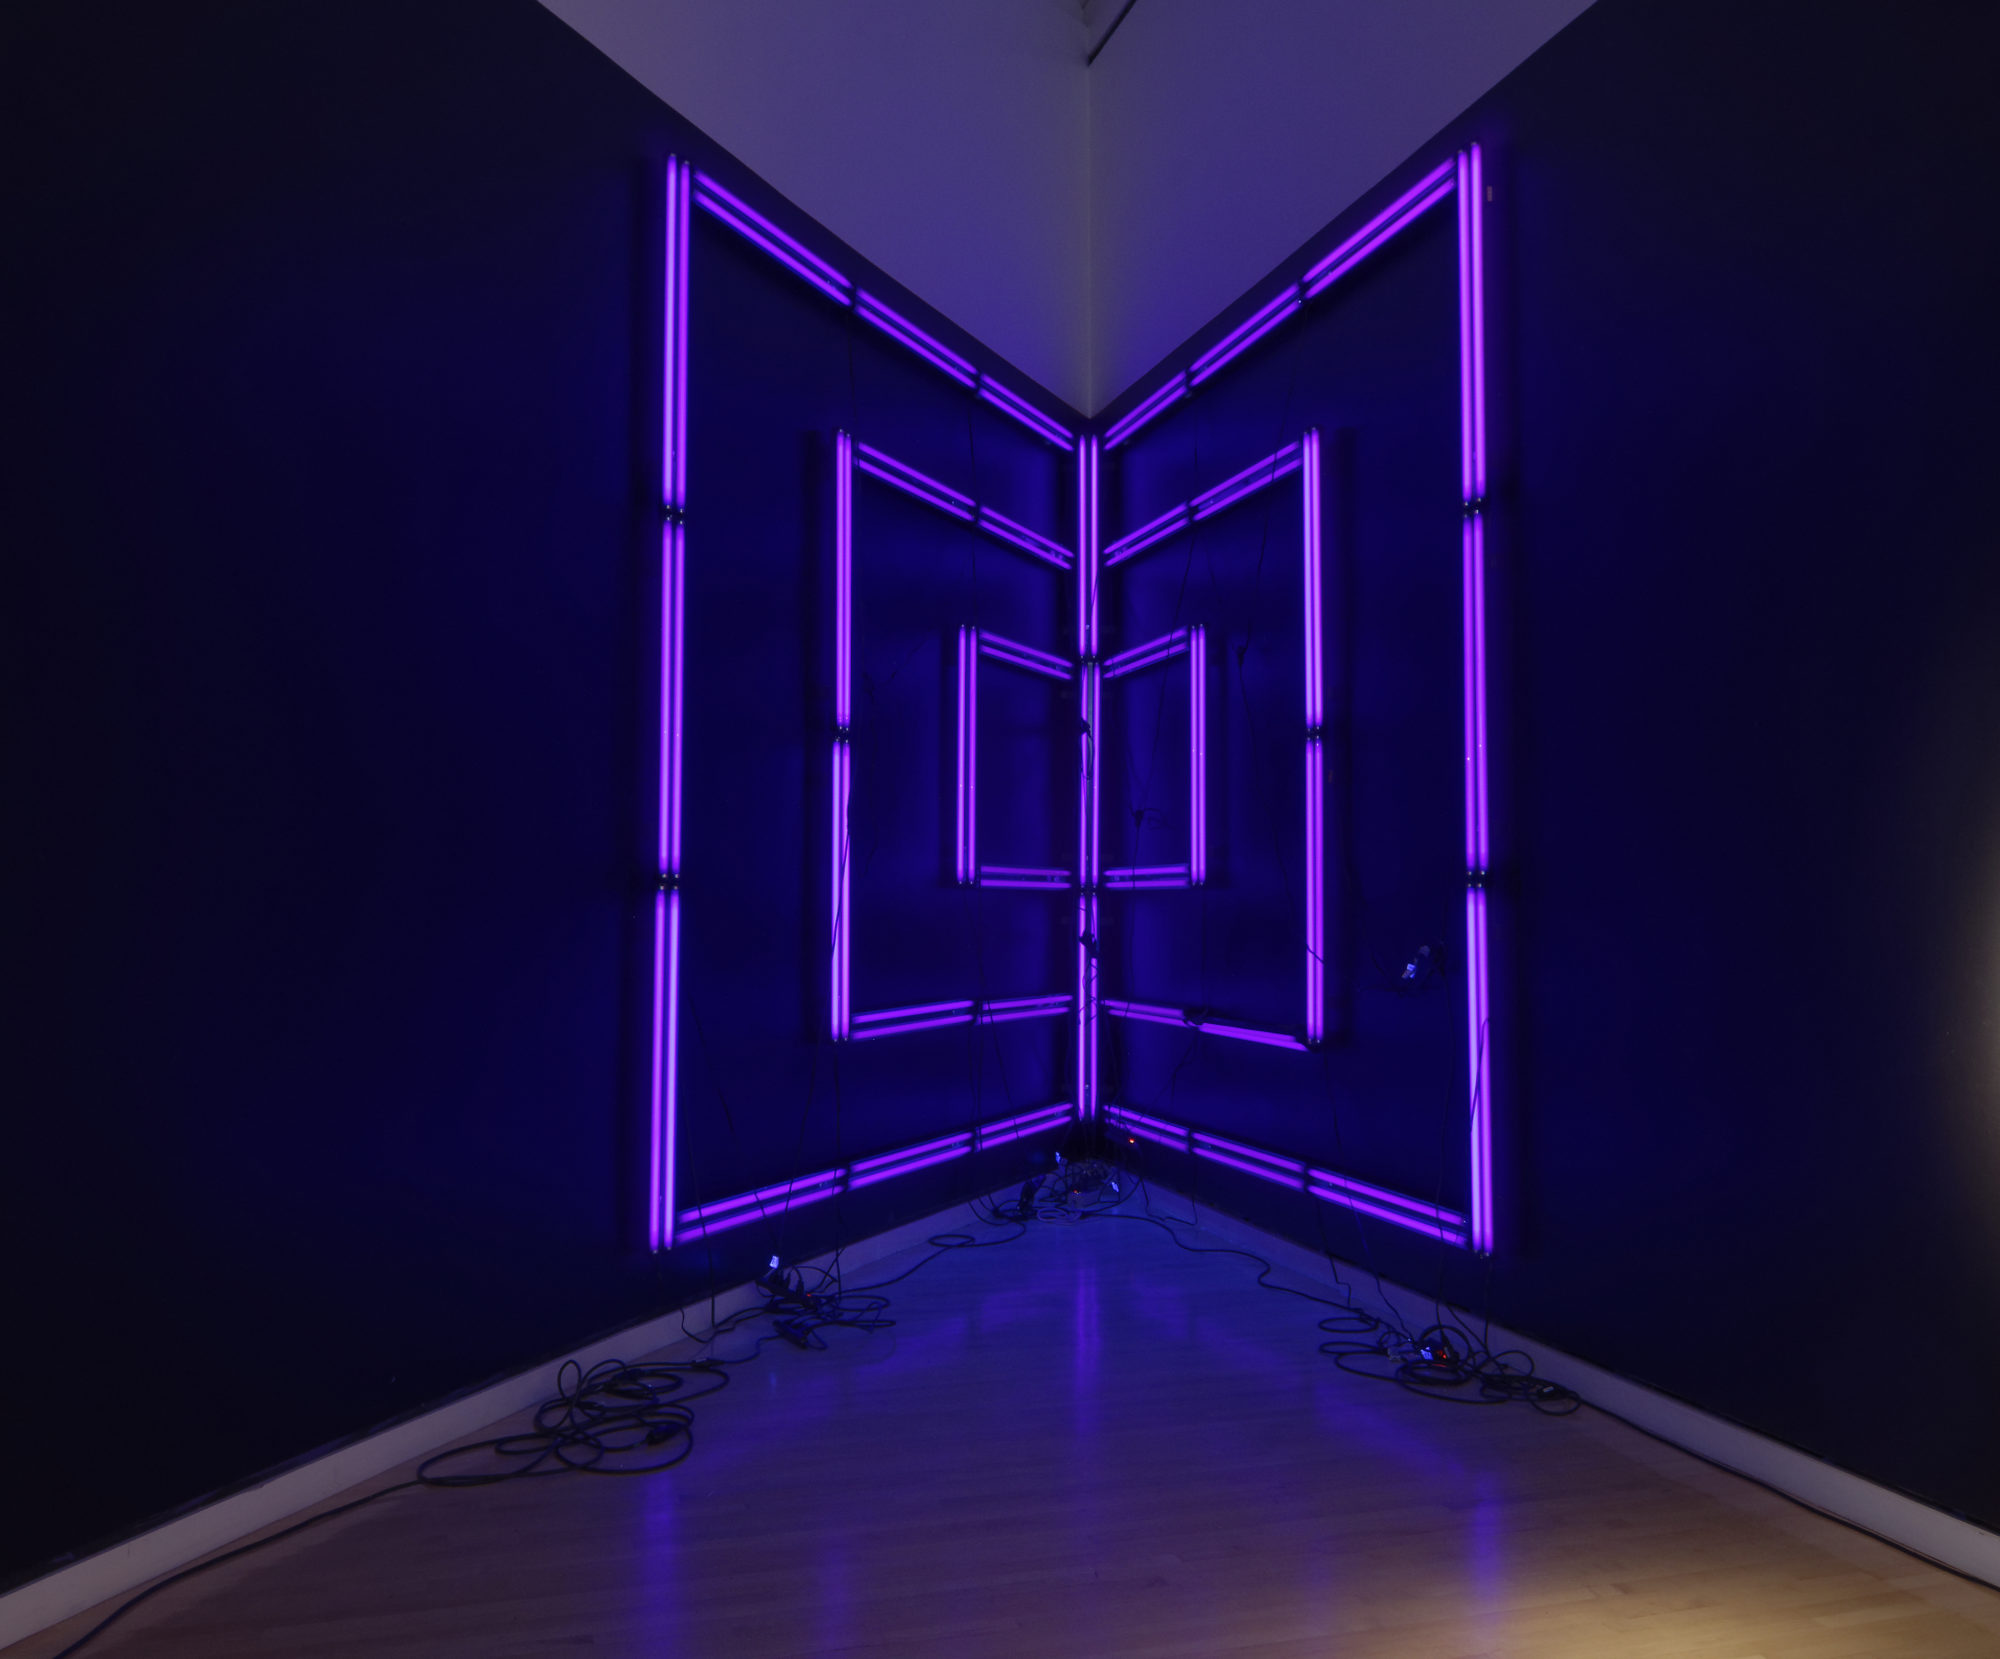 Purple LED strip lights set in a square geometric display in the corner of the wall